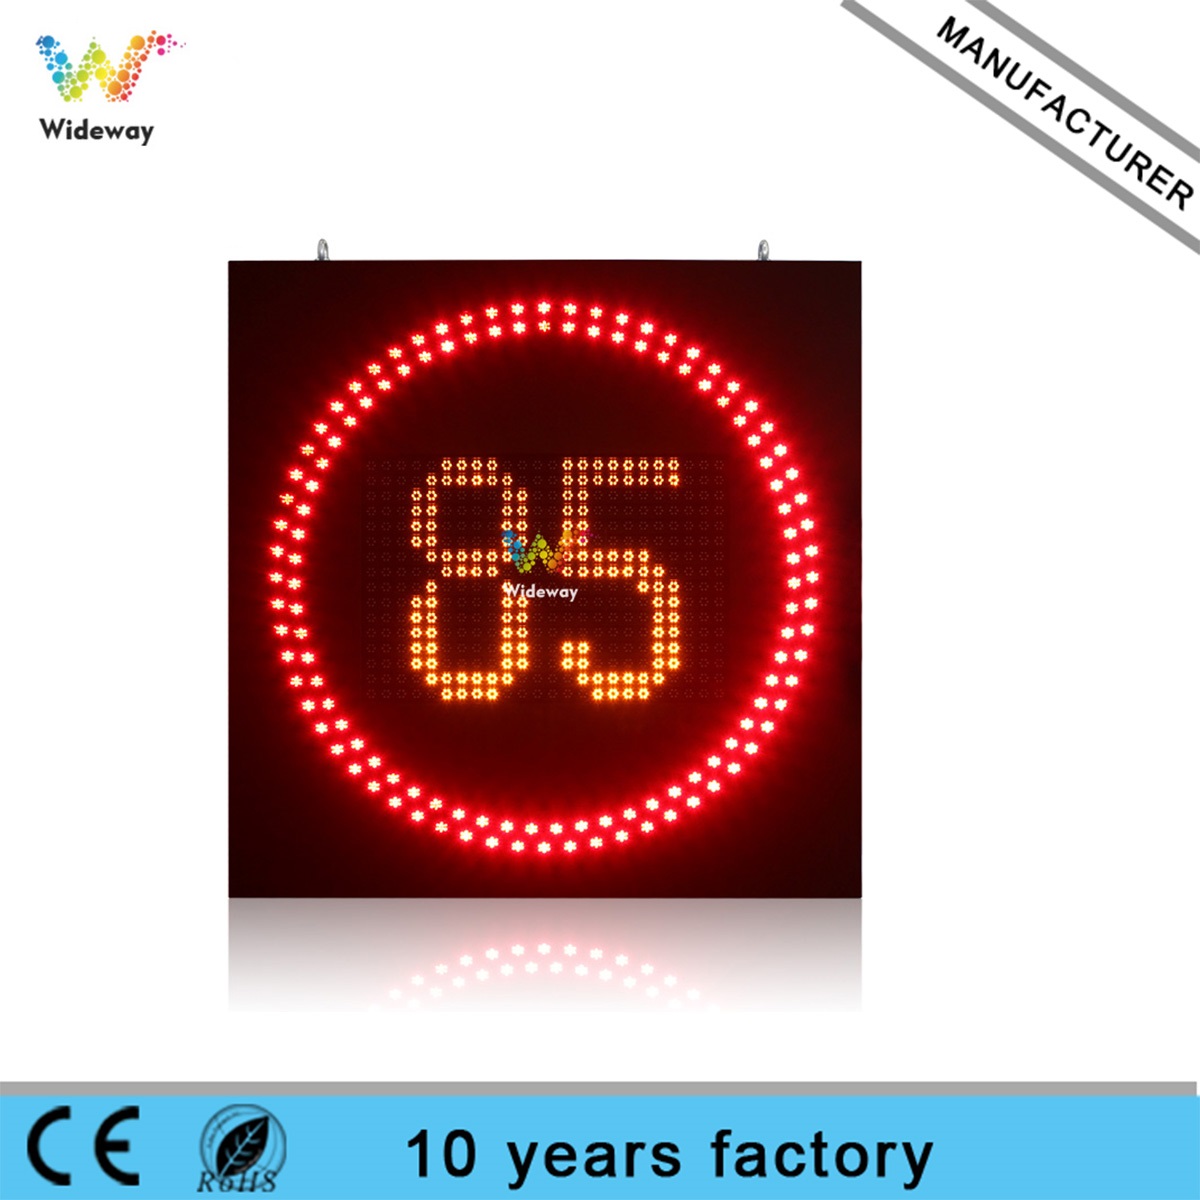 Customized size high quality radar led flashing variable speed limit sign